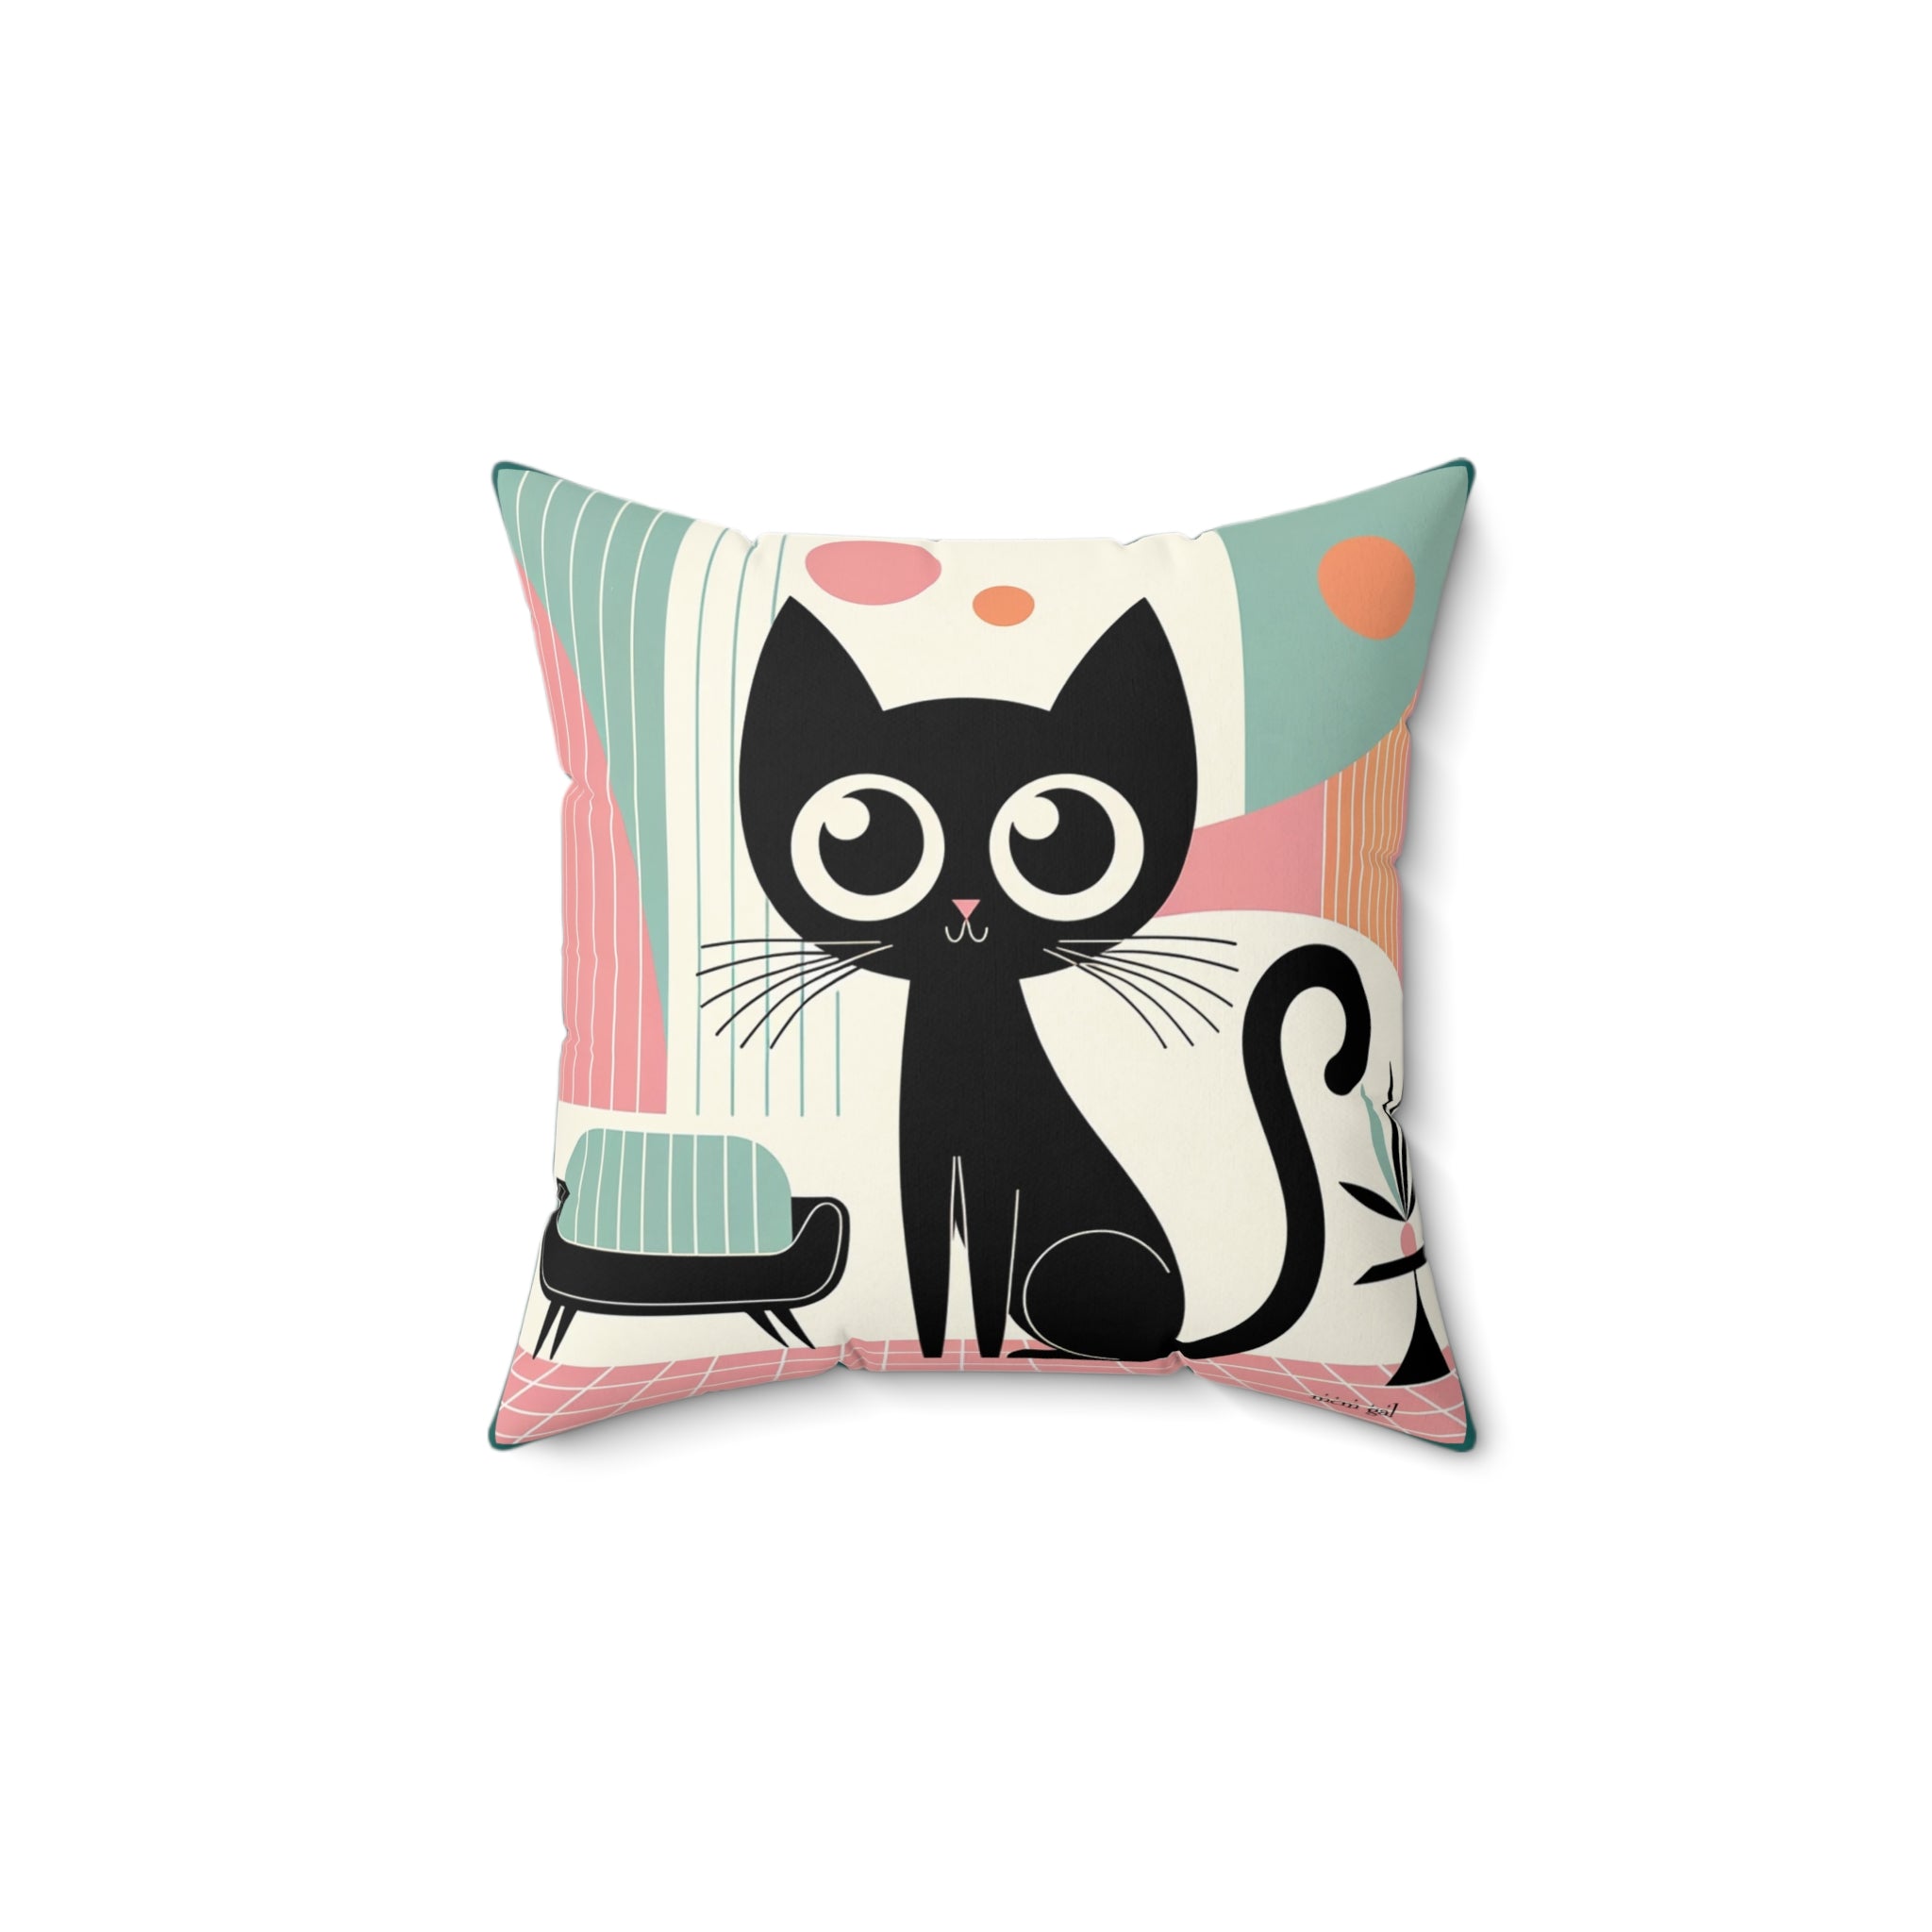 Mid Mod Atomic Cat Kitschy Throw Pillow Including Insert, MCM Home Decor